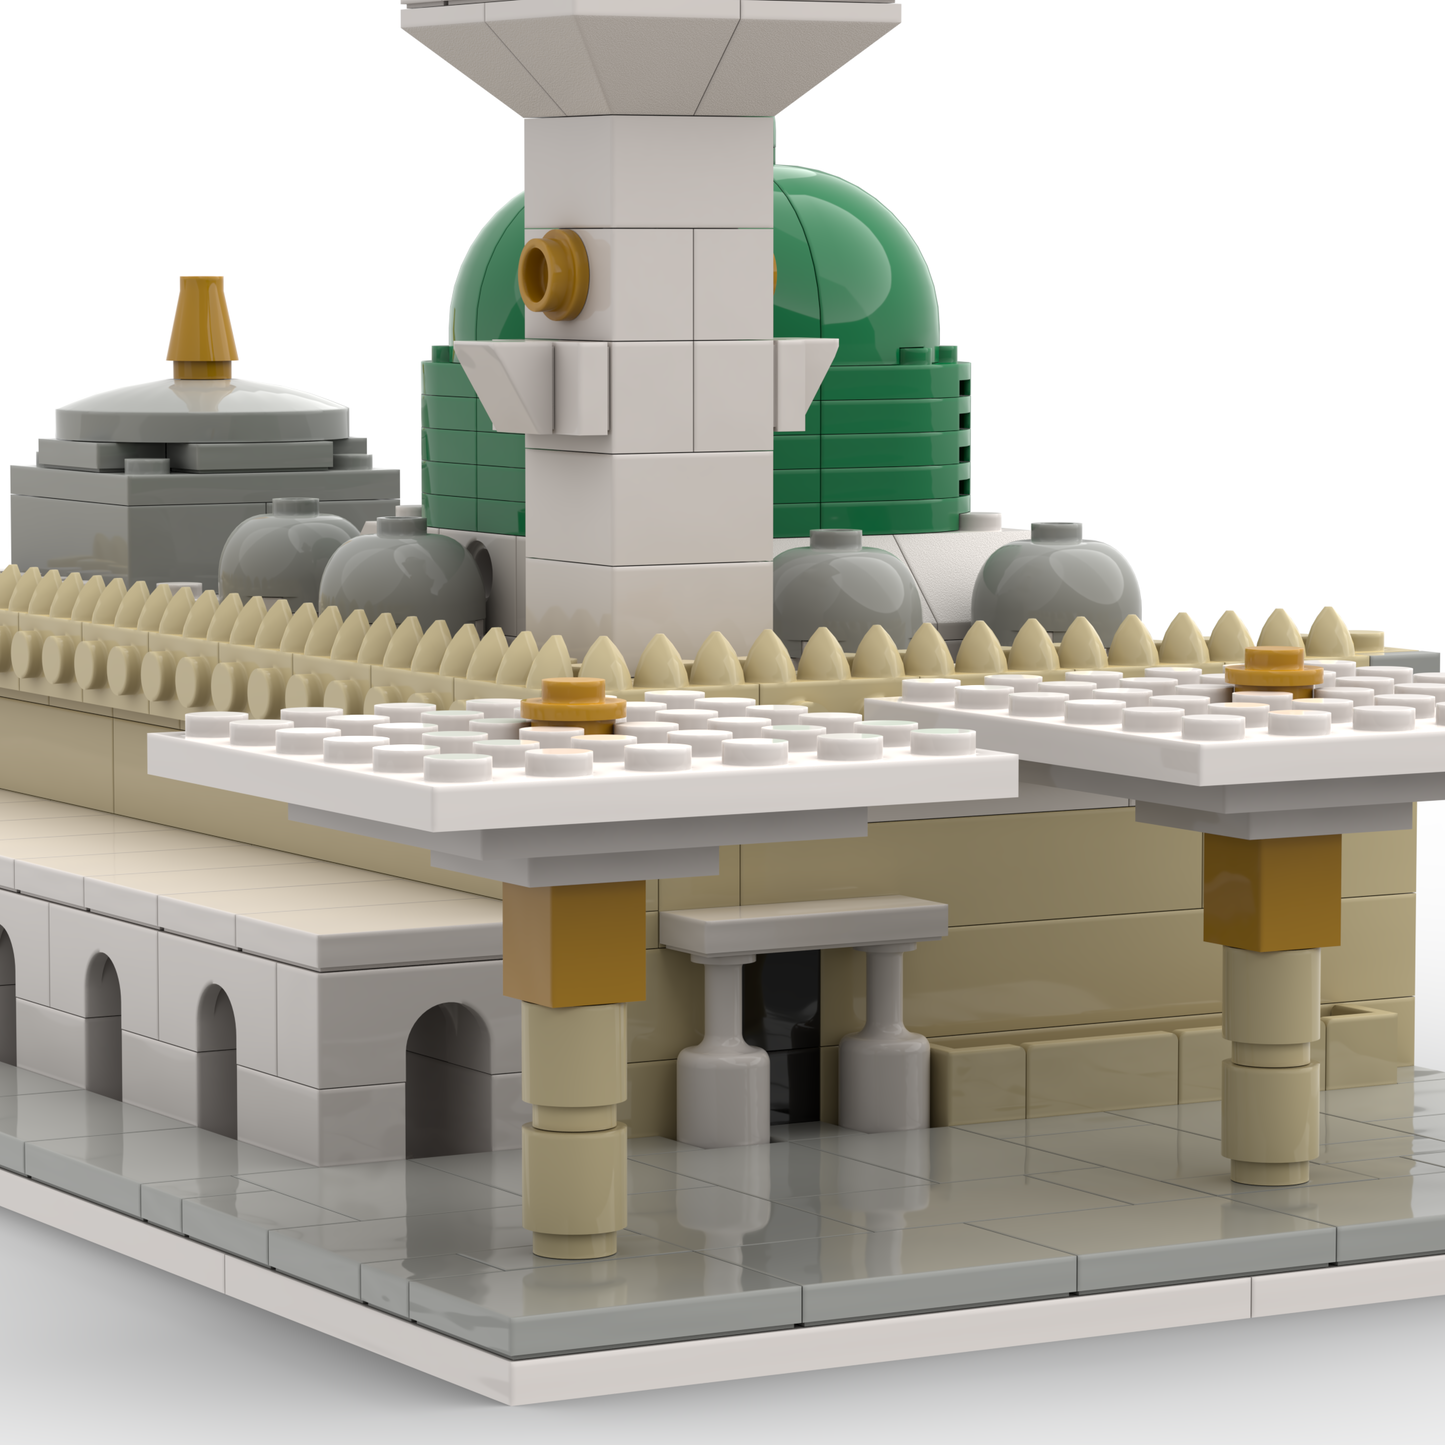 Masjid An Nabawi - Islamic Building Blocks Set of the Prophet's Mosque